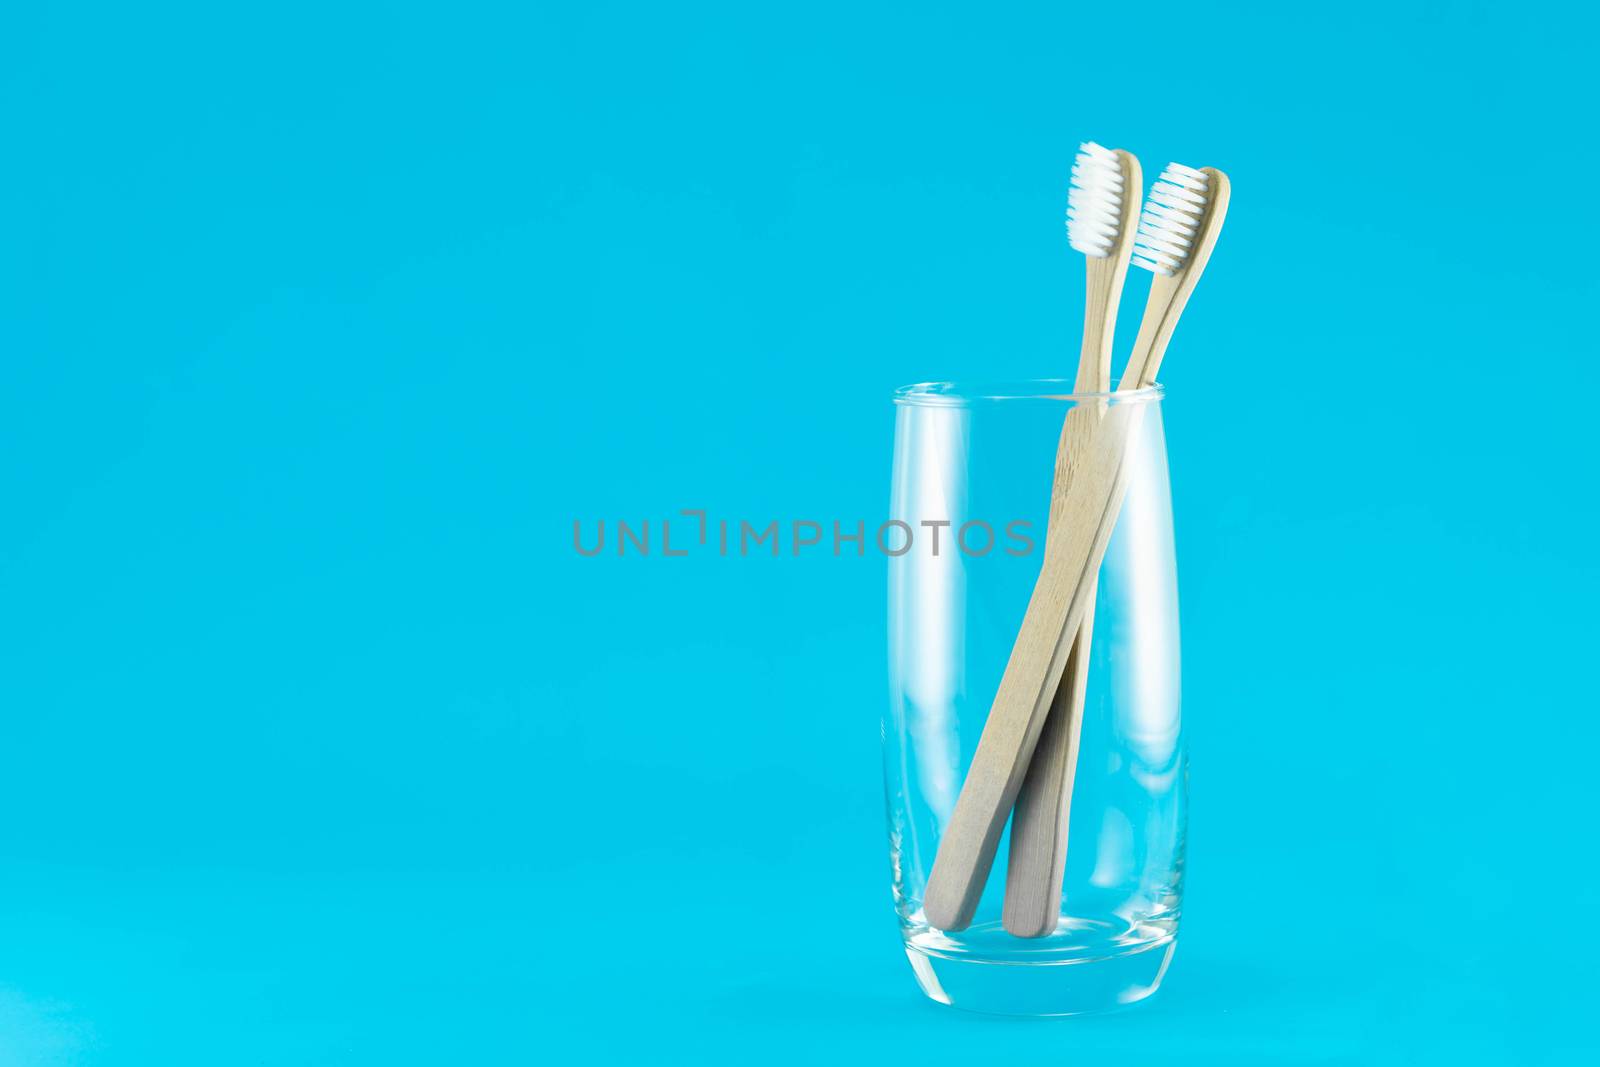 Wooden toothbrush in glass with blue background, selective focus